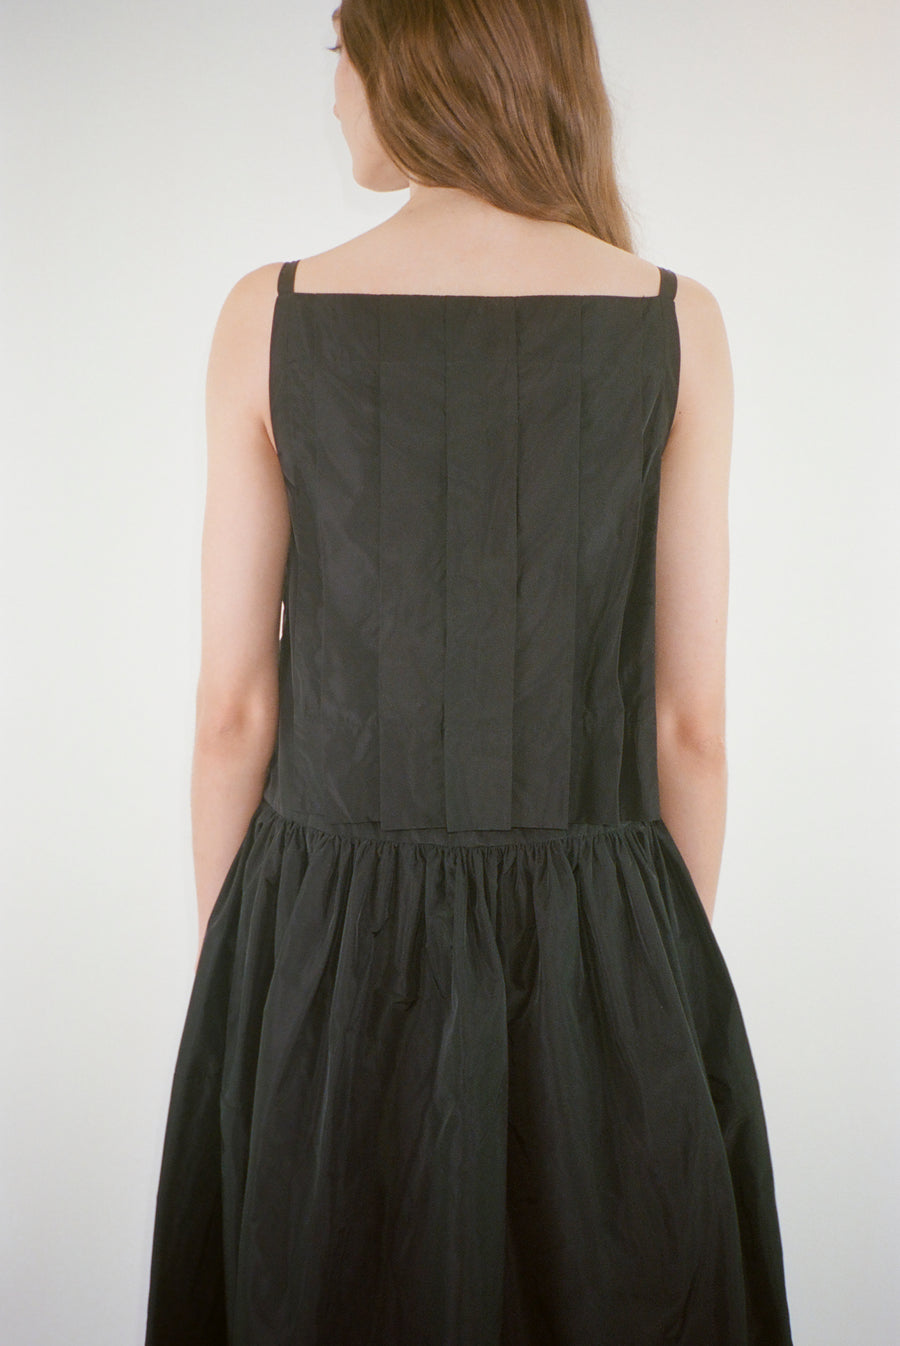 Midi length dress in black taffeta with buttons and cape detail at back on model